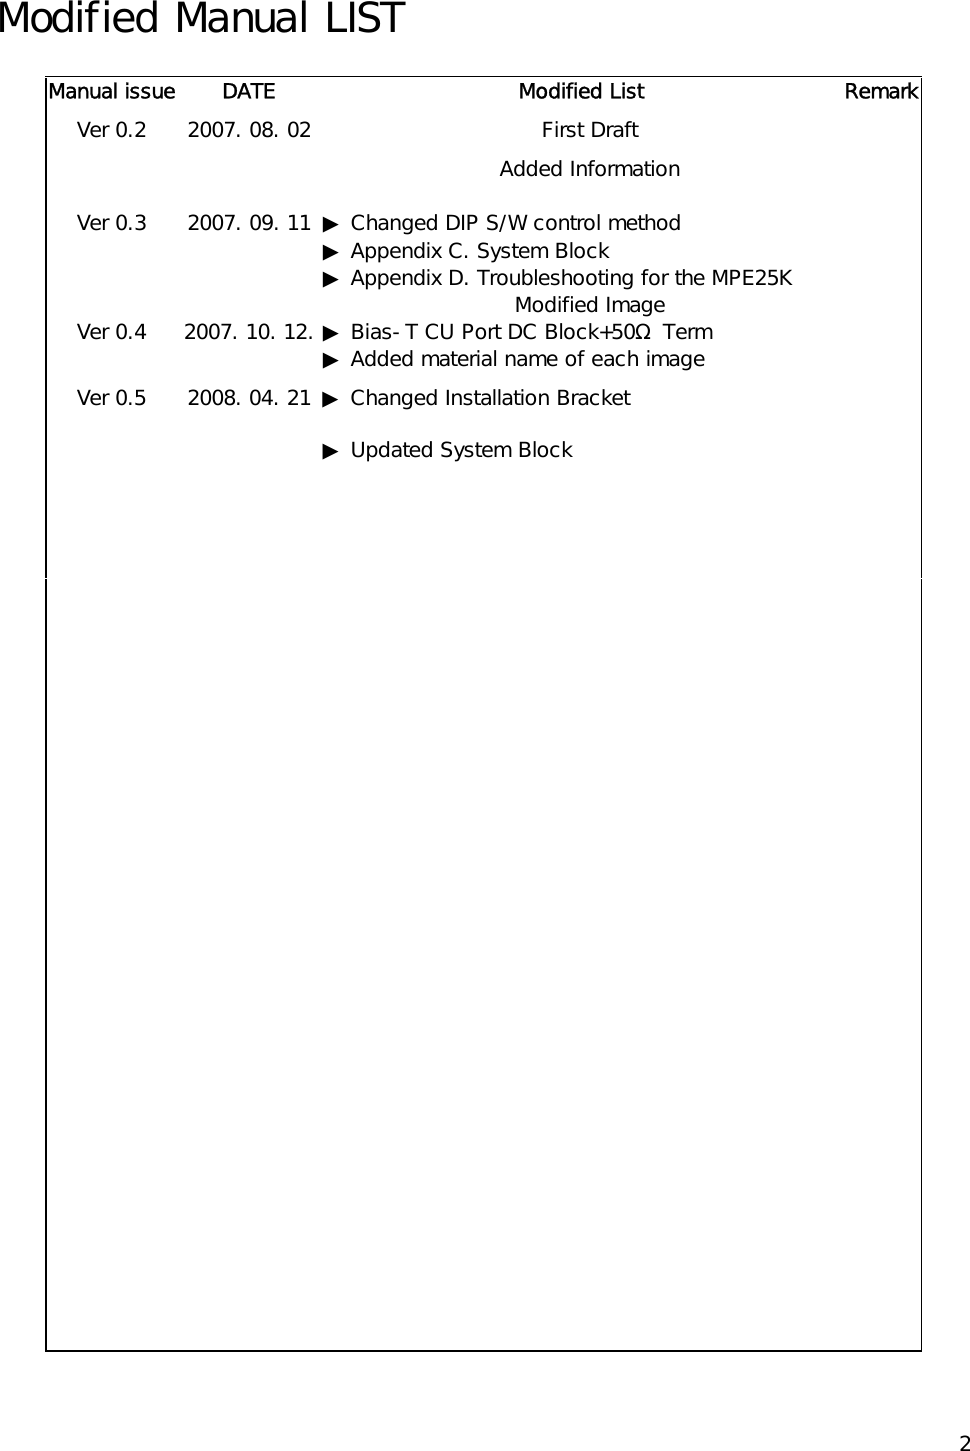    2Modified Manual LIST Manual issue  DATE  Modified List  RemarkVer 0.2  2007. 08. 02  First Draft   Ver 0.3  2007. 09. 11 Added Information   ▶ Changed DIP S/W control method  ▶ Appendix C. System Block ▶ Appendix D. Troubleshooting for the MPE25K  Ver 0.4  2007. 10. 12.  Modified Image ▶ Bias-T CU Port DC Block+50Ω  Term  ▶ Added material name of each image   Ver 0.5  2008. 04. 21  ▶ Changed Installation Bracket       ▶ Updated System Block                                                                                         